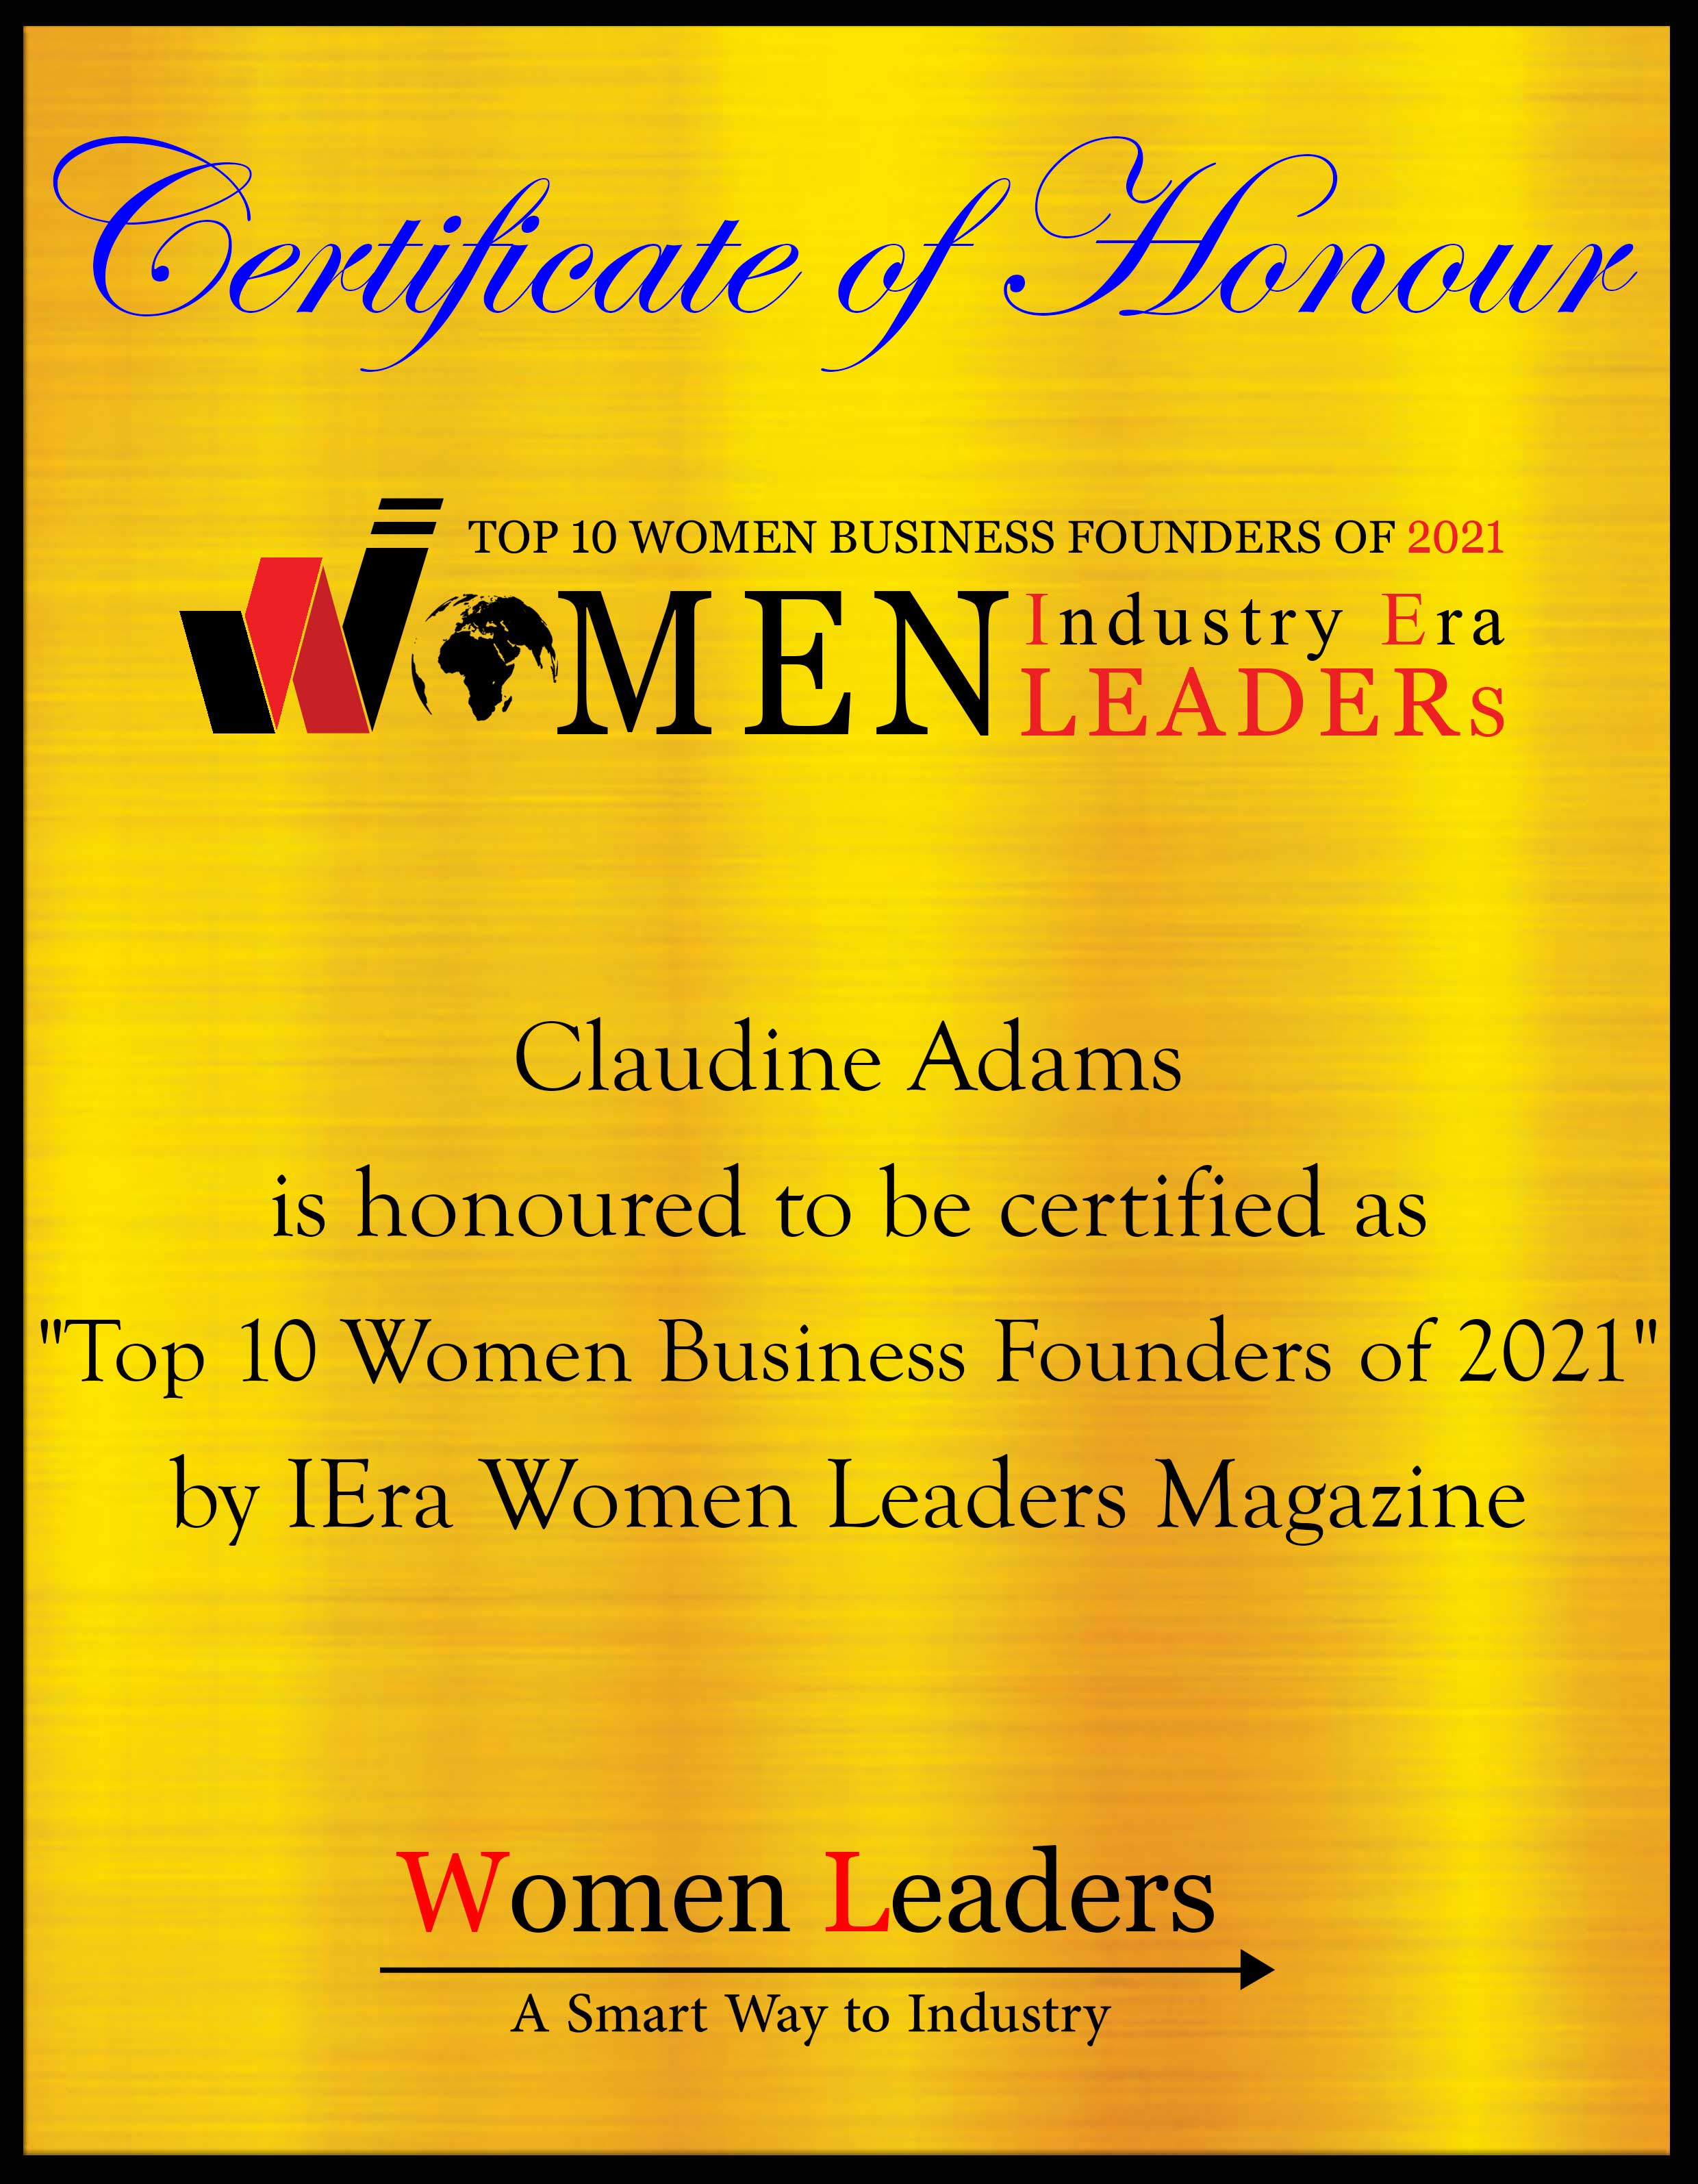 Claudine Adams,Founder & CEO of Bravura Information Technology Systems, Inc., Top Women Business Founders of 2021